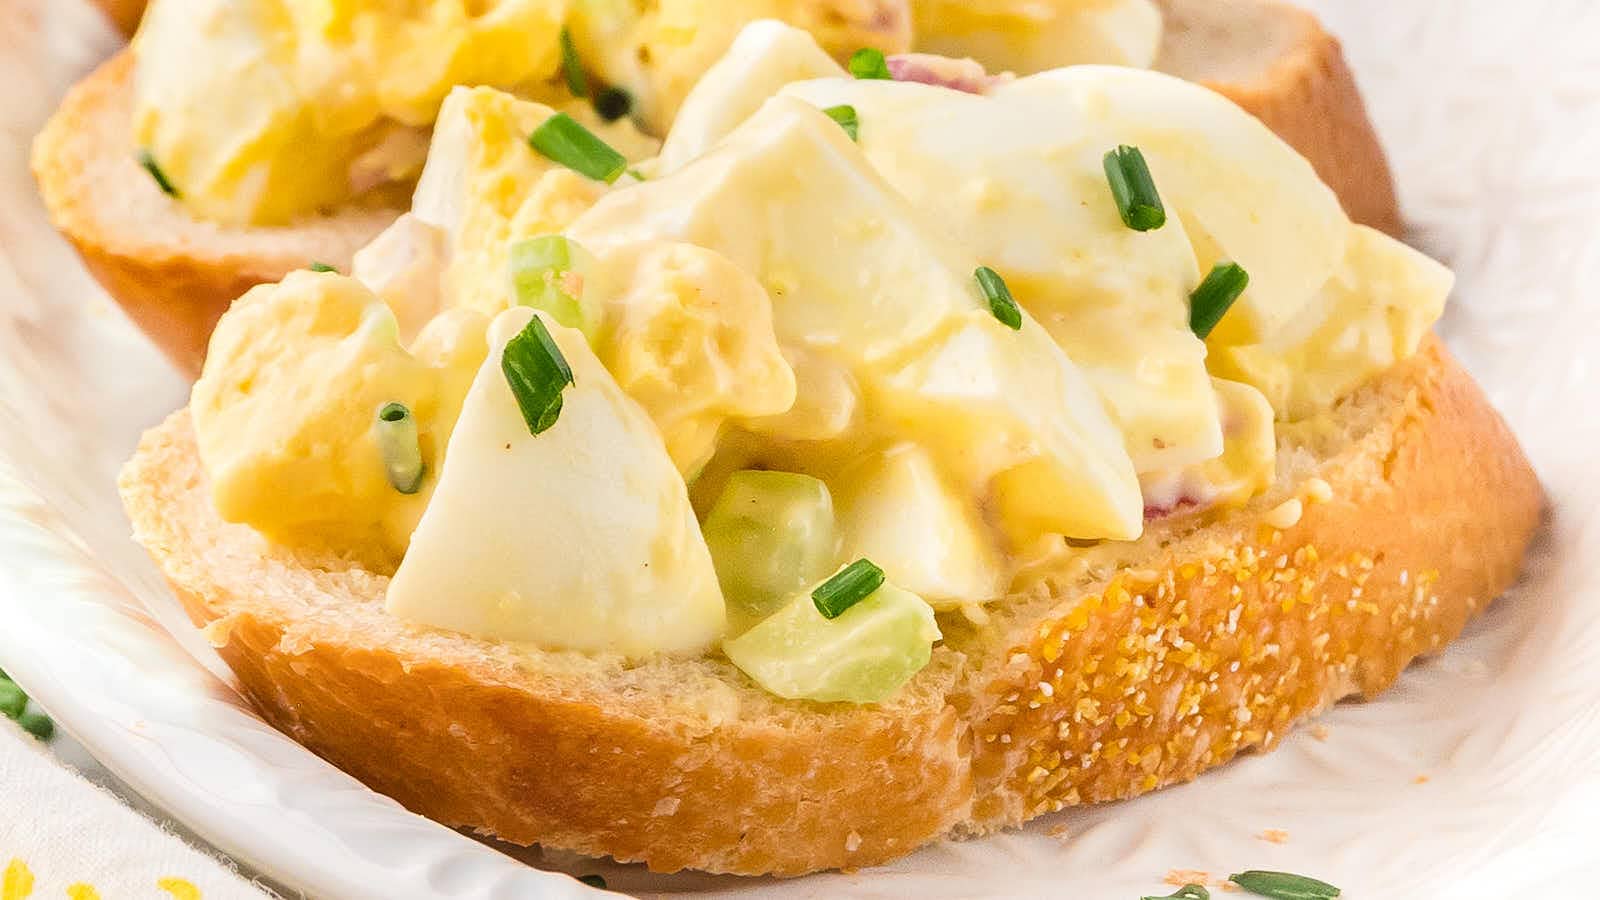 Egg Salad recipe by Cheerful Cook.